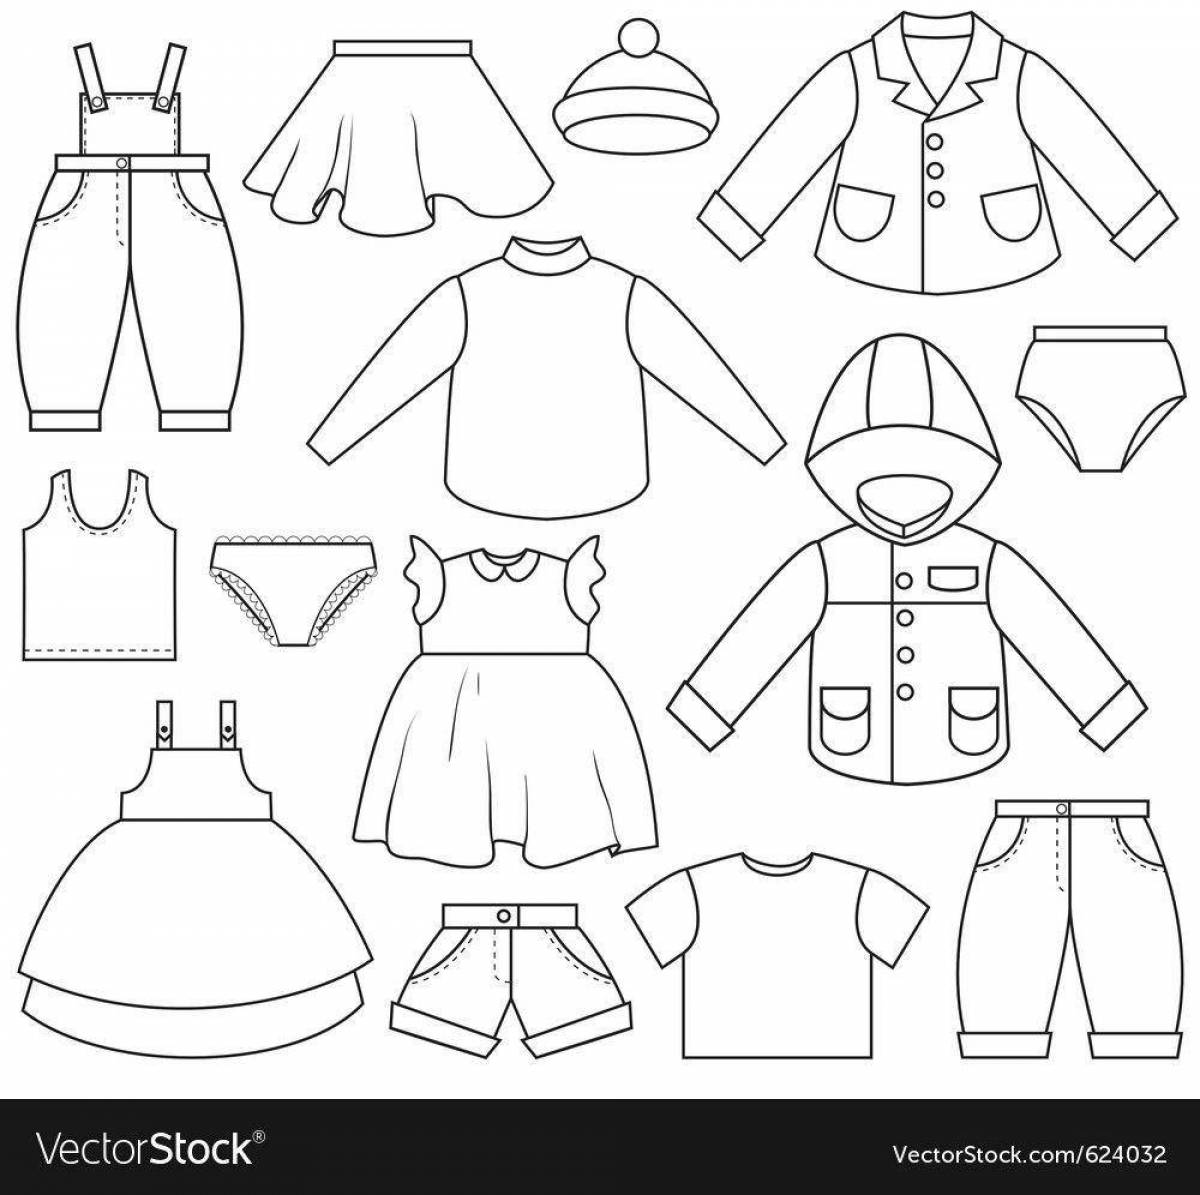 Clothes for children 6 7 years old #8